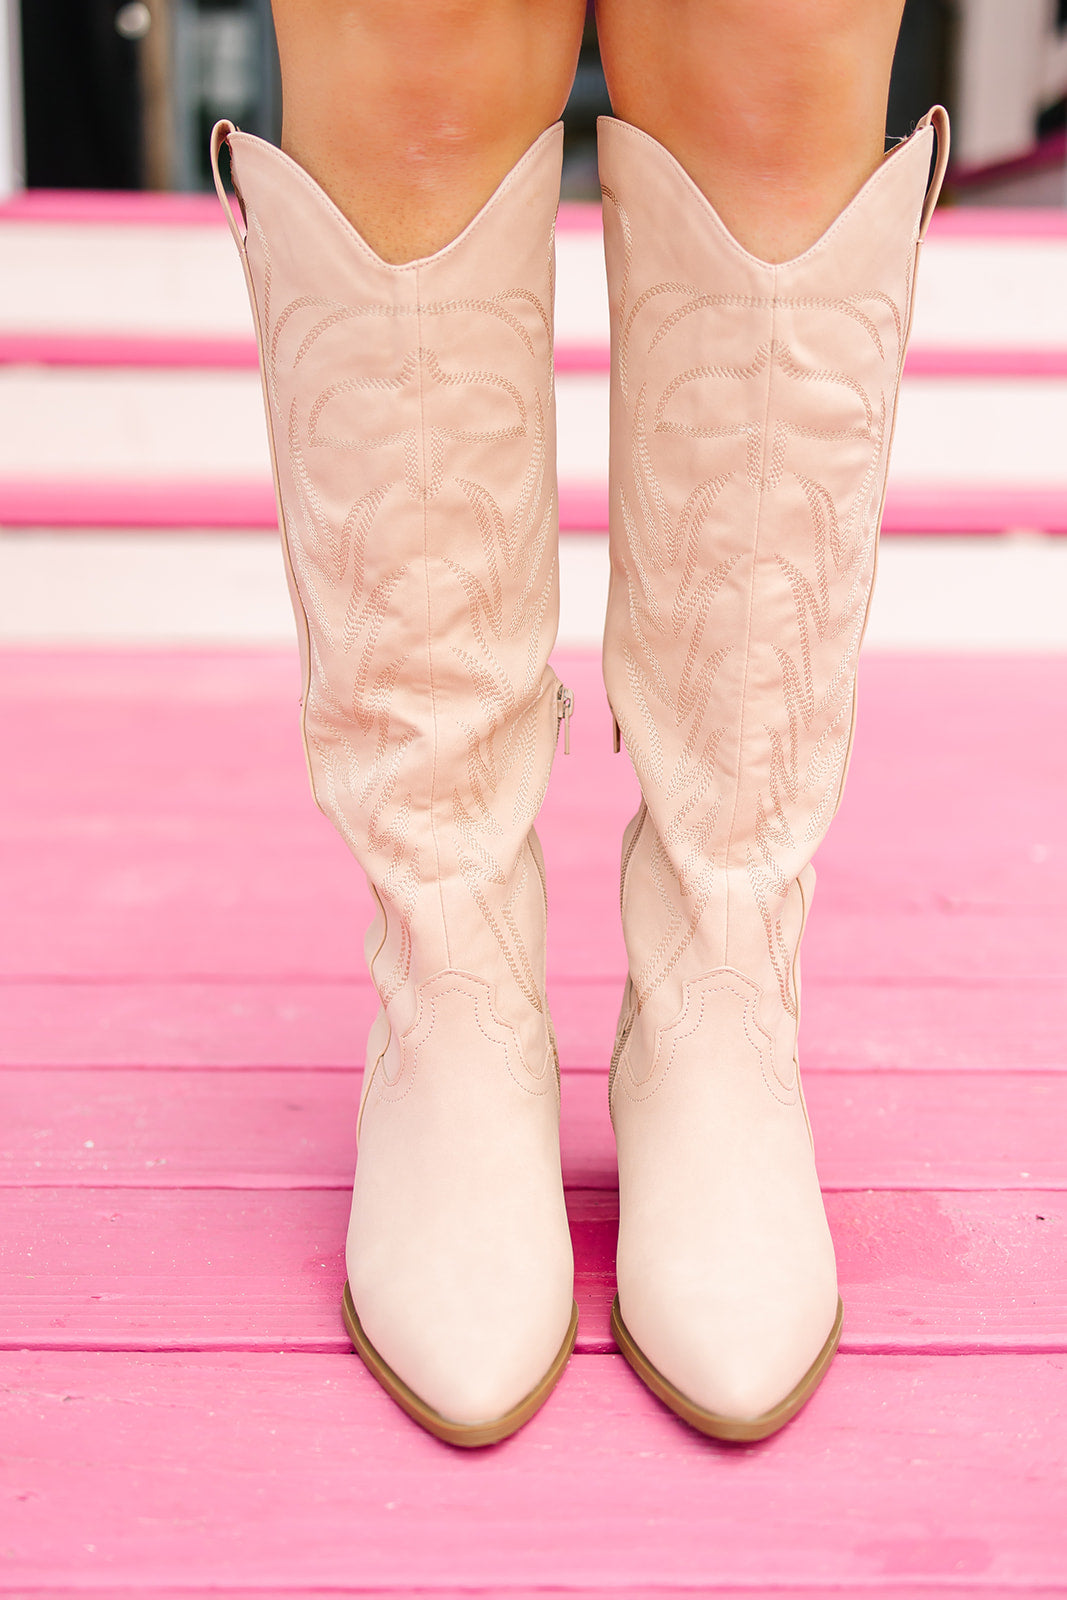 Urban Cowgirl Boots